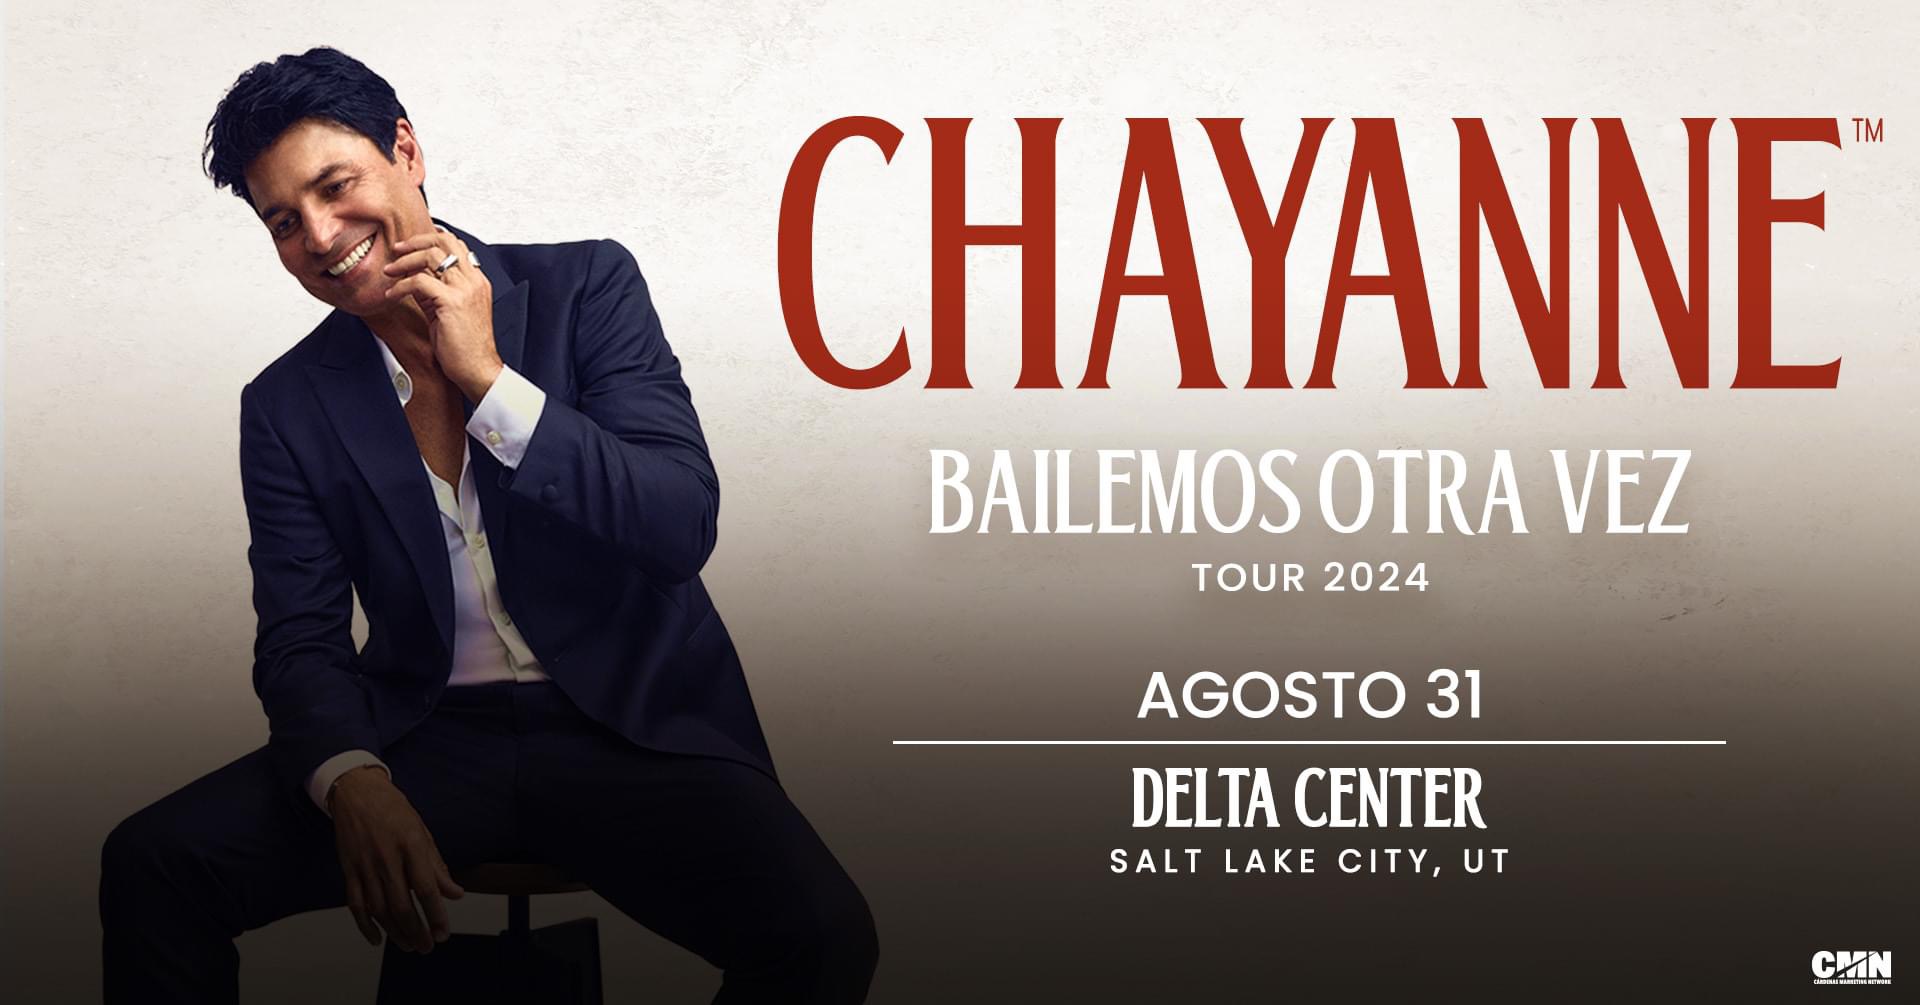 <h1 class="tribe-events-single-event-title">CHAYANNE</h1>